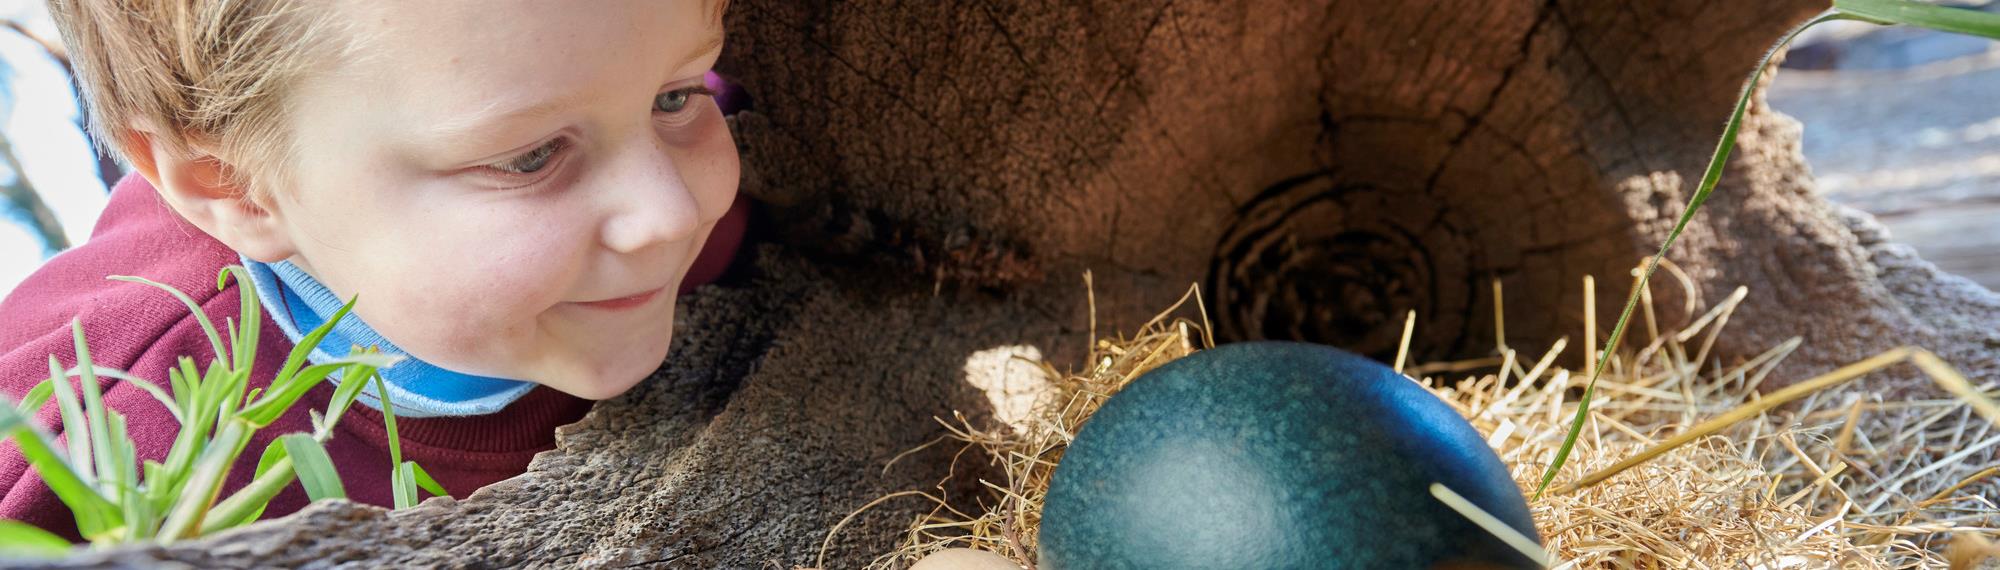 Small child looking into a hollow log with a nest. Inside the nest are three small pale eggs and a large green emu egg.  